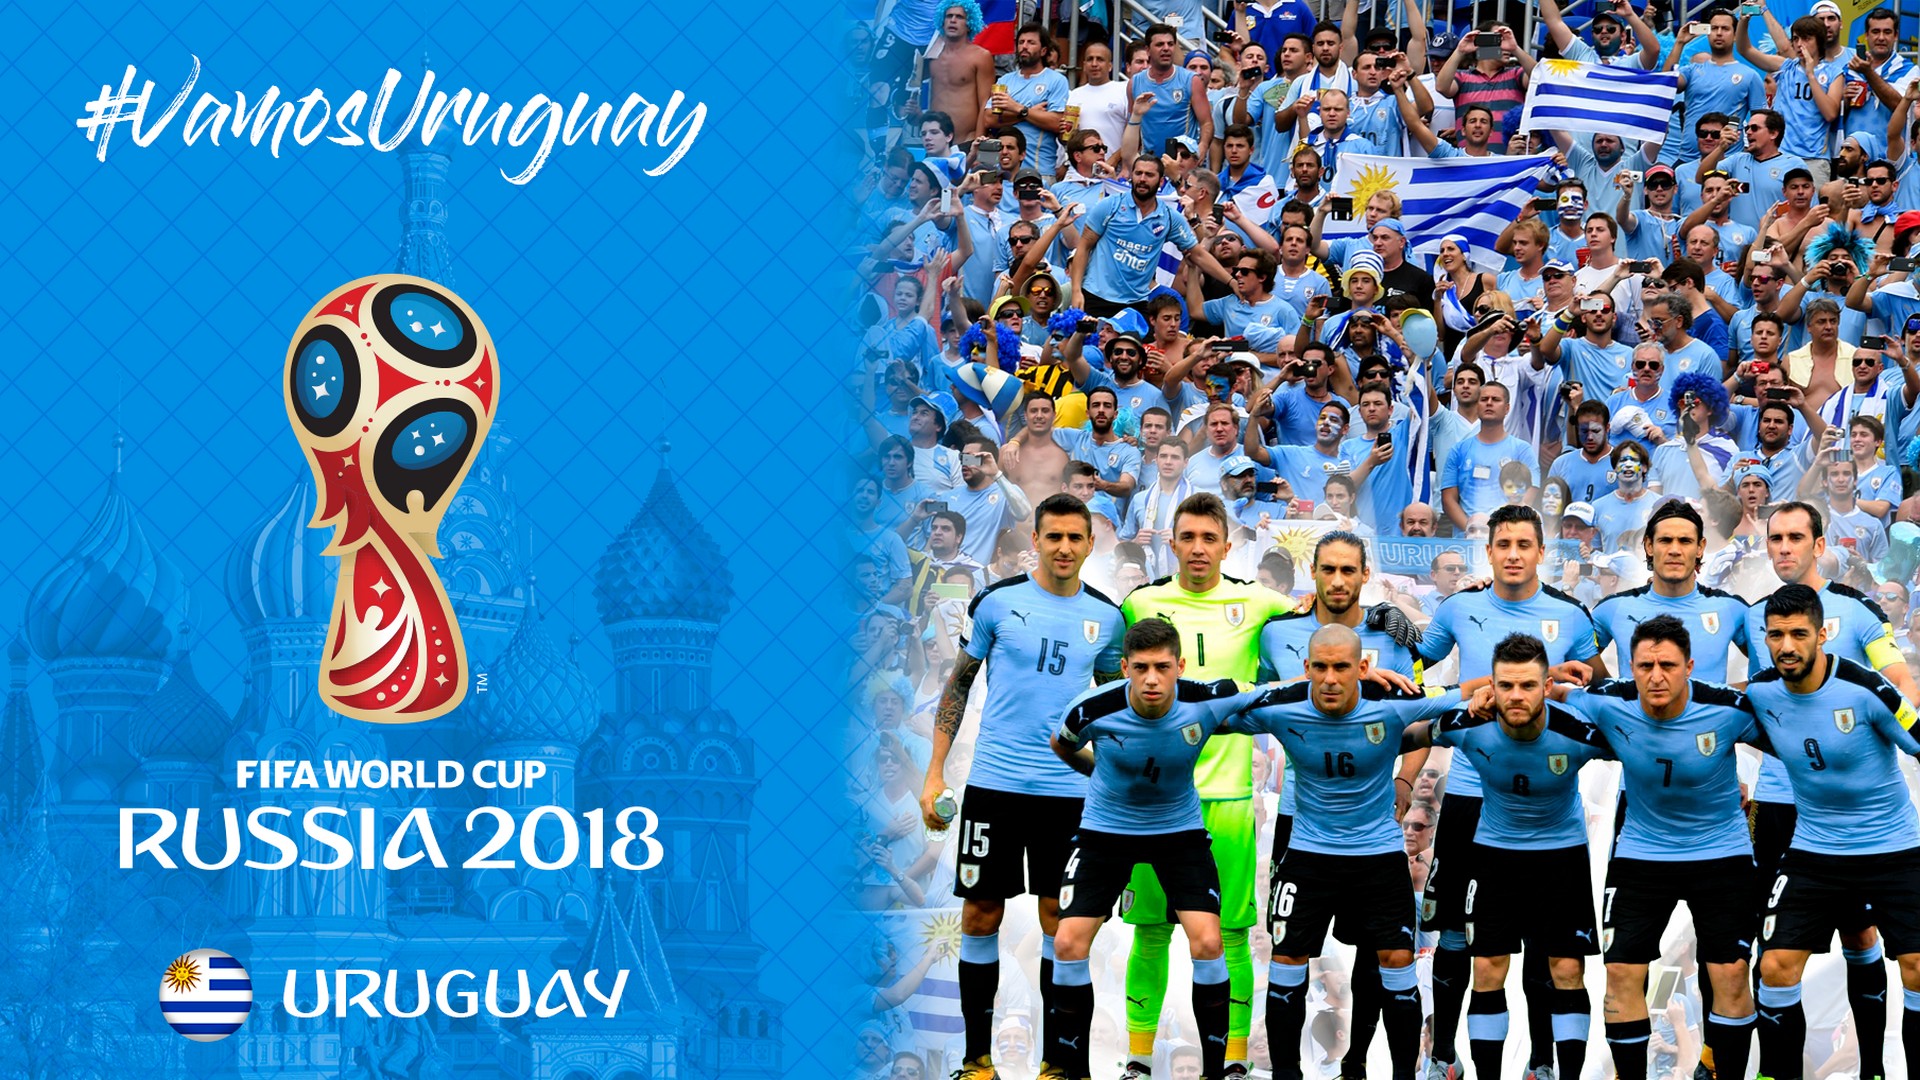 Uruguay National Team Desktop Wallpaper with image resolution 1920x1080 pixel. You can use this wallpaper as background for your desktop Computer Screensavers, Android or iPhone smartphones